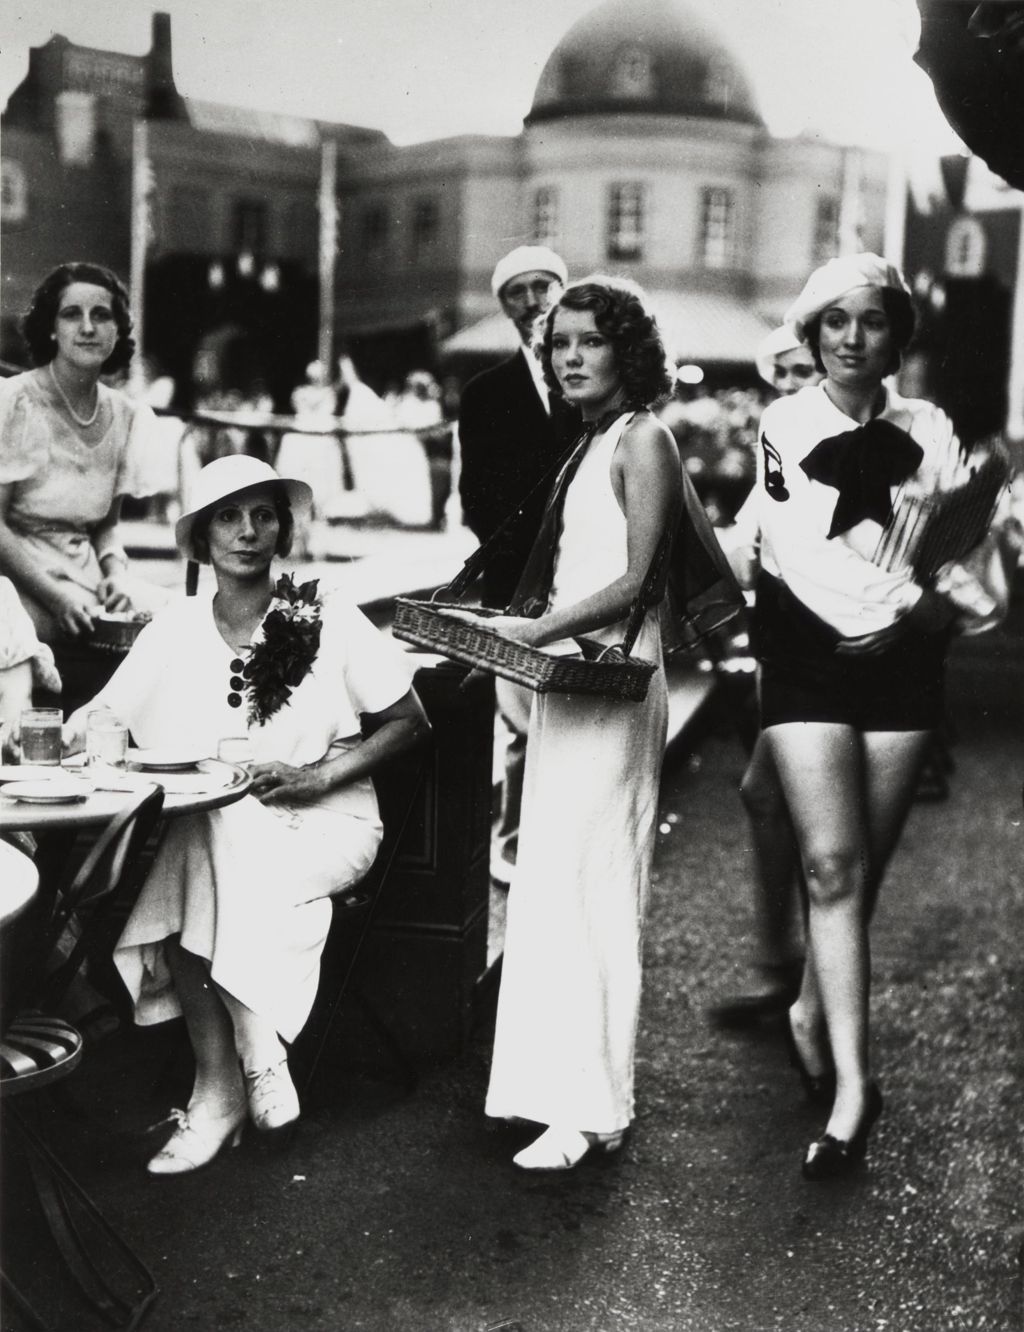 Aimee Semple McPherson (seated on the left) at the Streets of Paris outdoor cafe